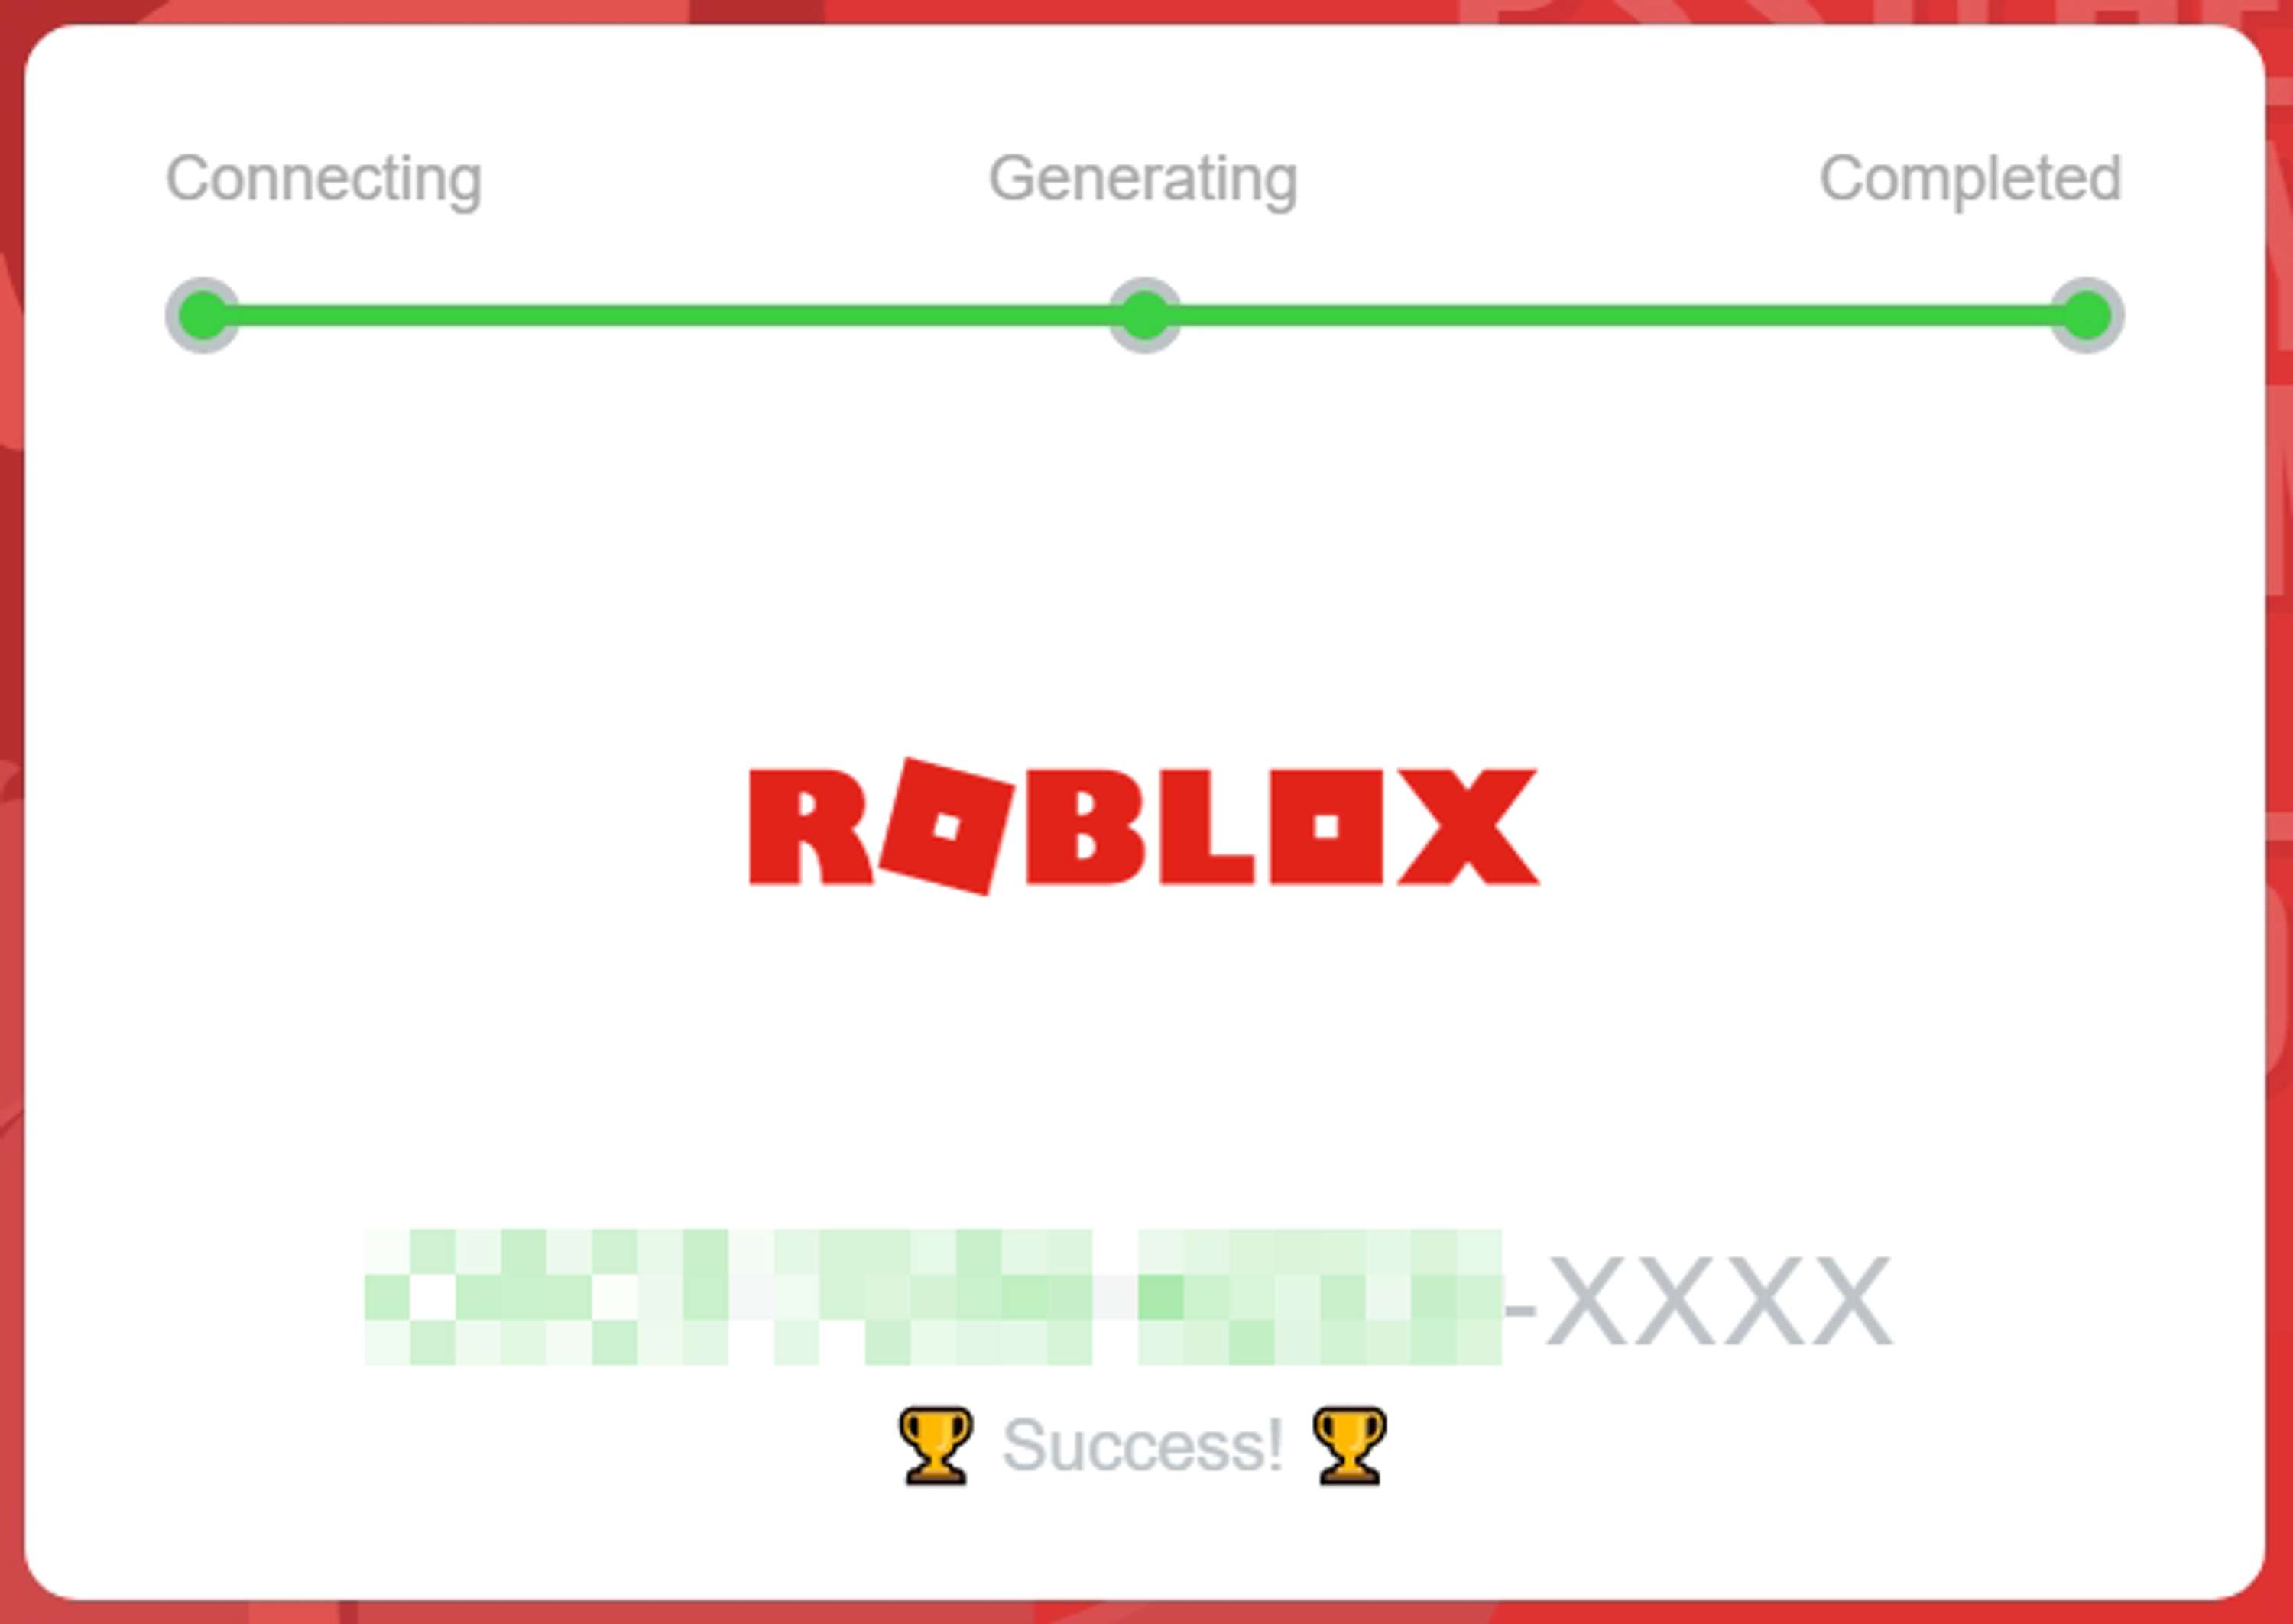 100 Free Roblox Gift Card Codes Generator The Dots - 100 roblox gift card codes roblox gifts gift card generator roblox